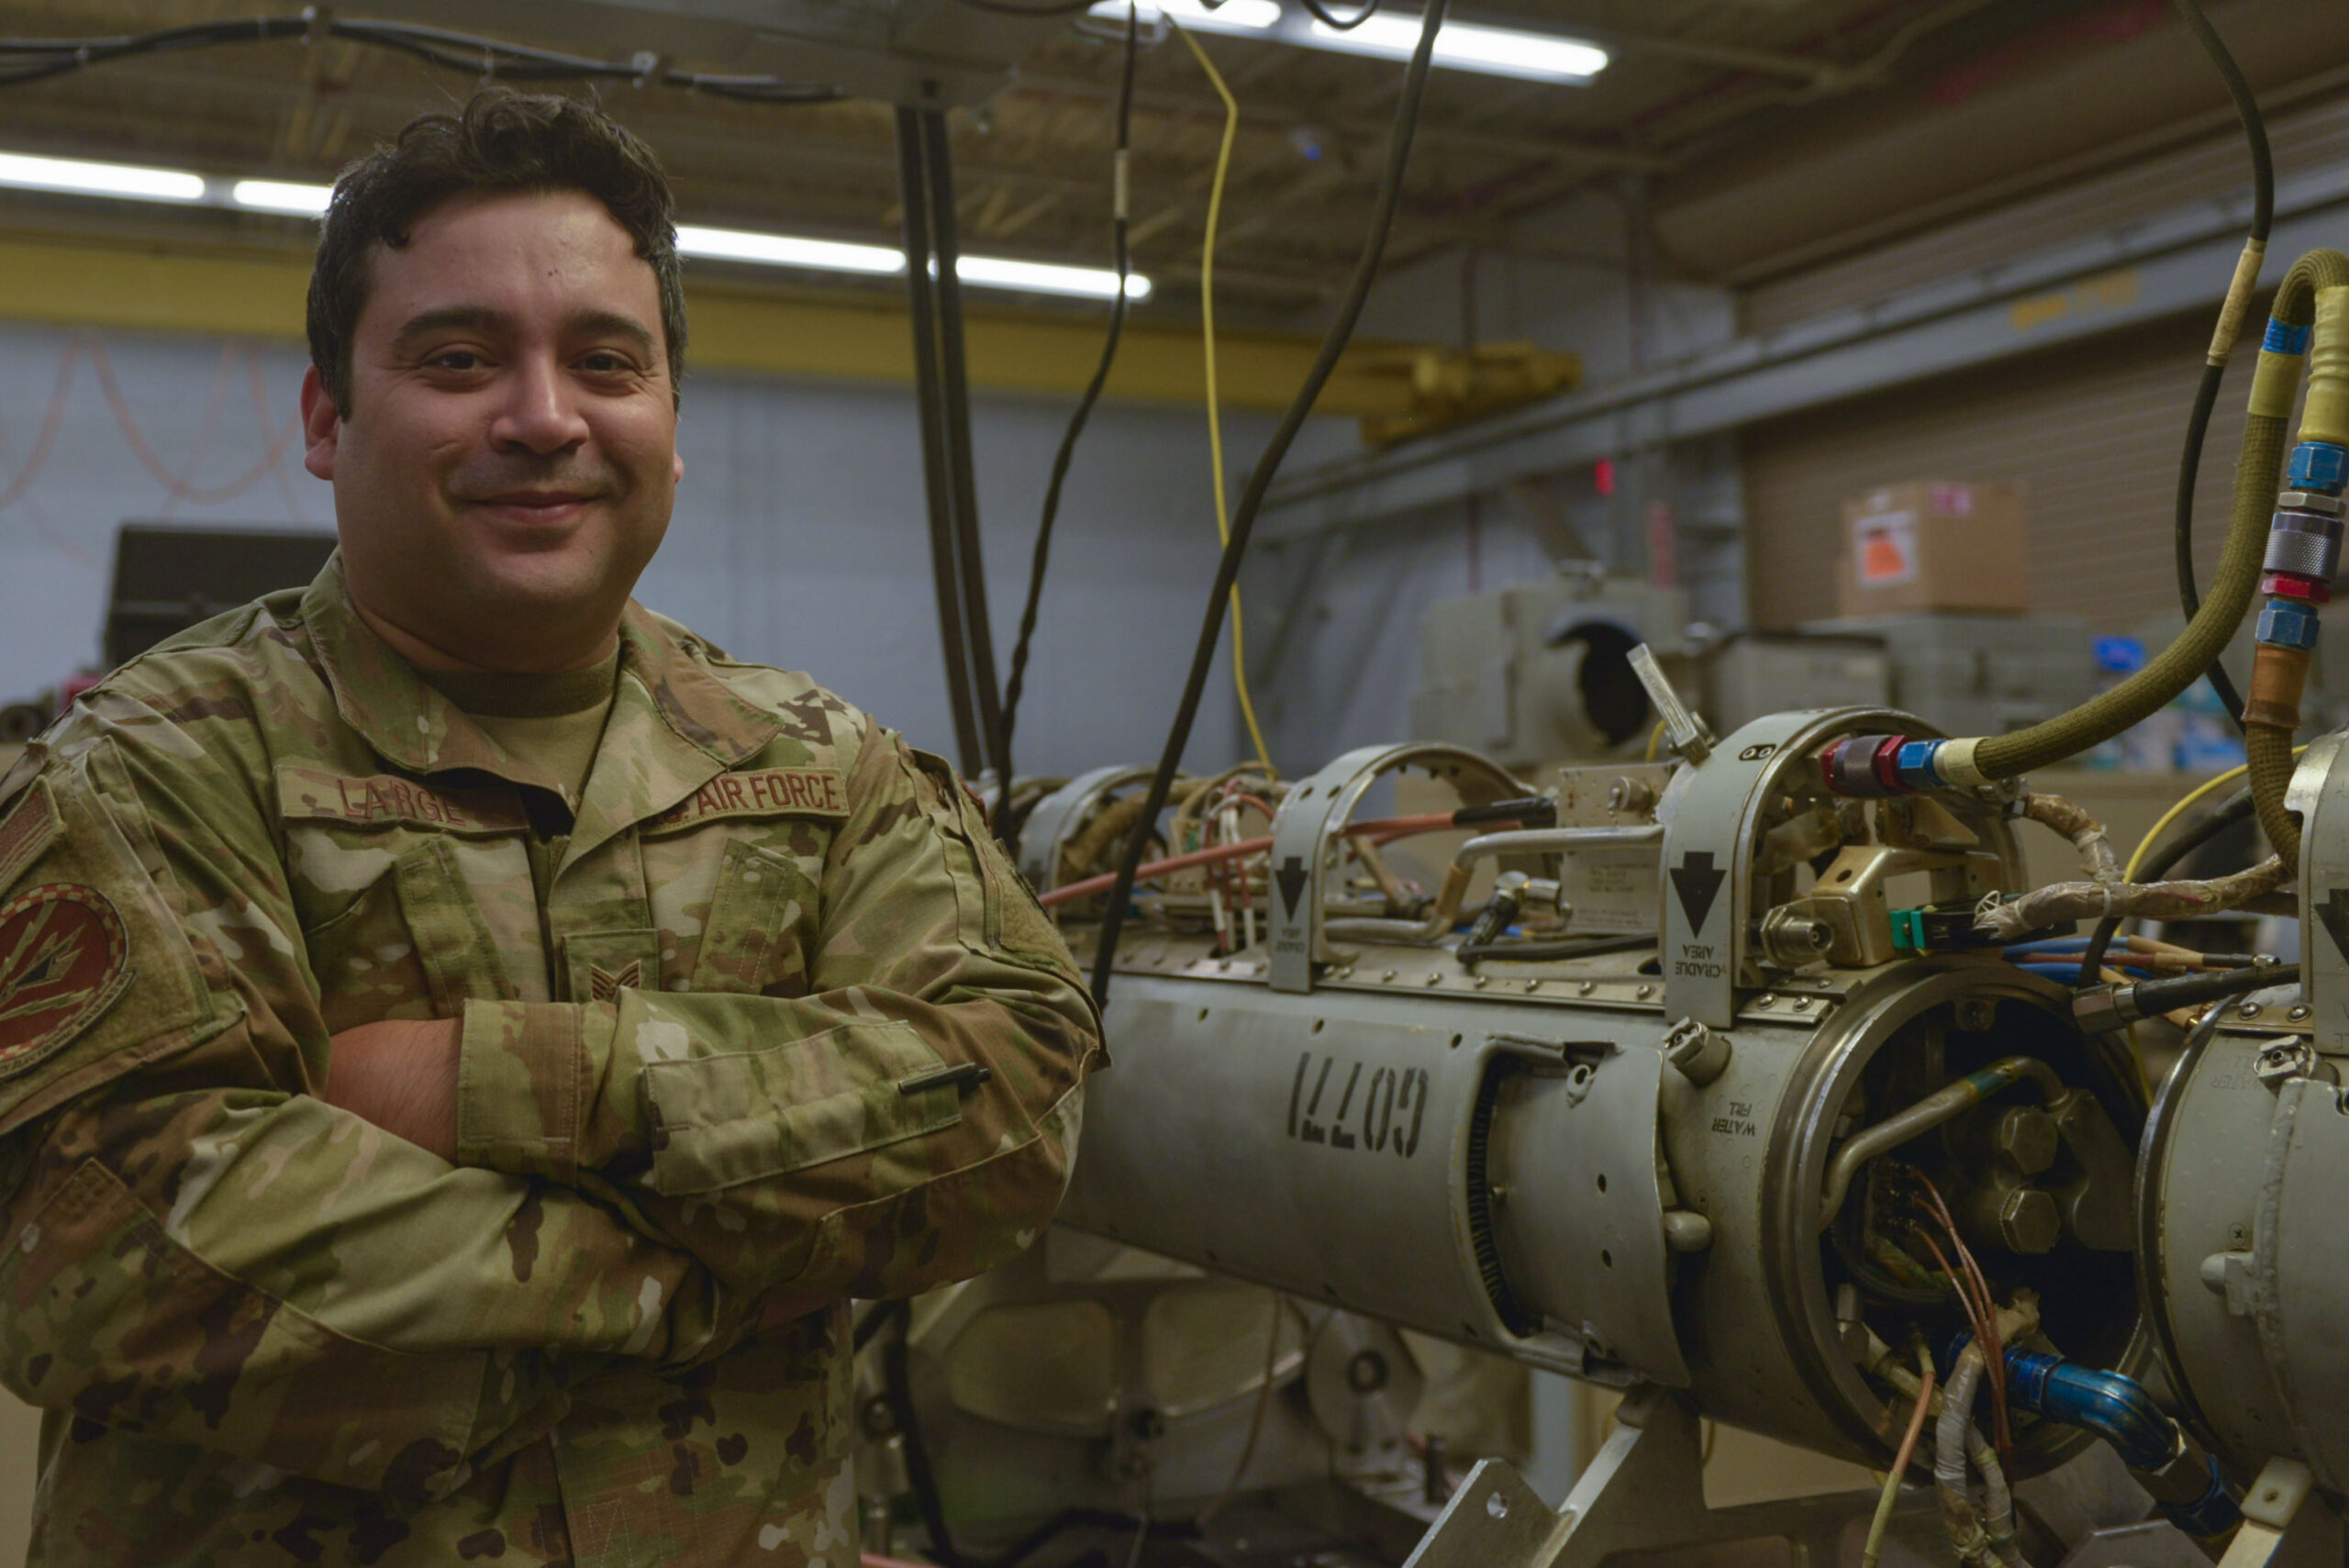 Staff Sgt. Harvey Large, 36th Electronic Warfare Squadron legacy lab section chief, poses for a photo in one of the wing's workshops used to develop new and improved EMS capabilities. <em>Credit: U.S. photo by Staff Sgt. Ericka A. Woolever</em>